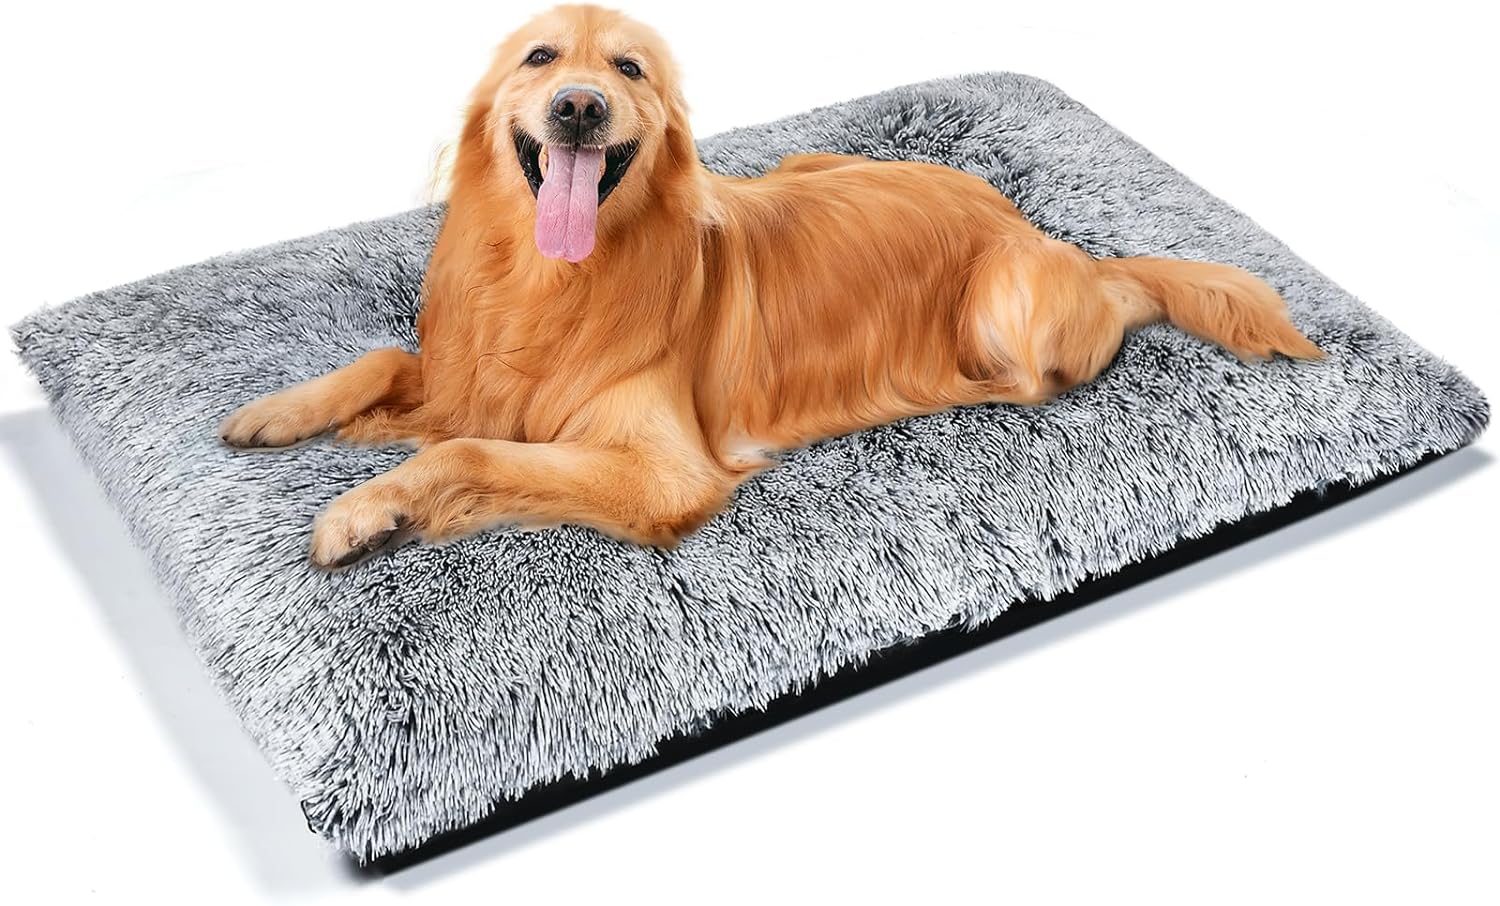 MINGT Dog Bed, Washable Dog Bed for Large Dogs Kennel pad, Anti-Slip Pet Sleeping for Medium Small Dogs Indoor Outdoor Use (M(30 x 21 in))